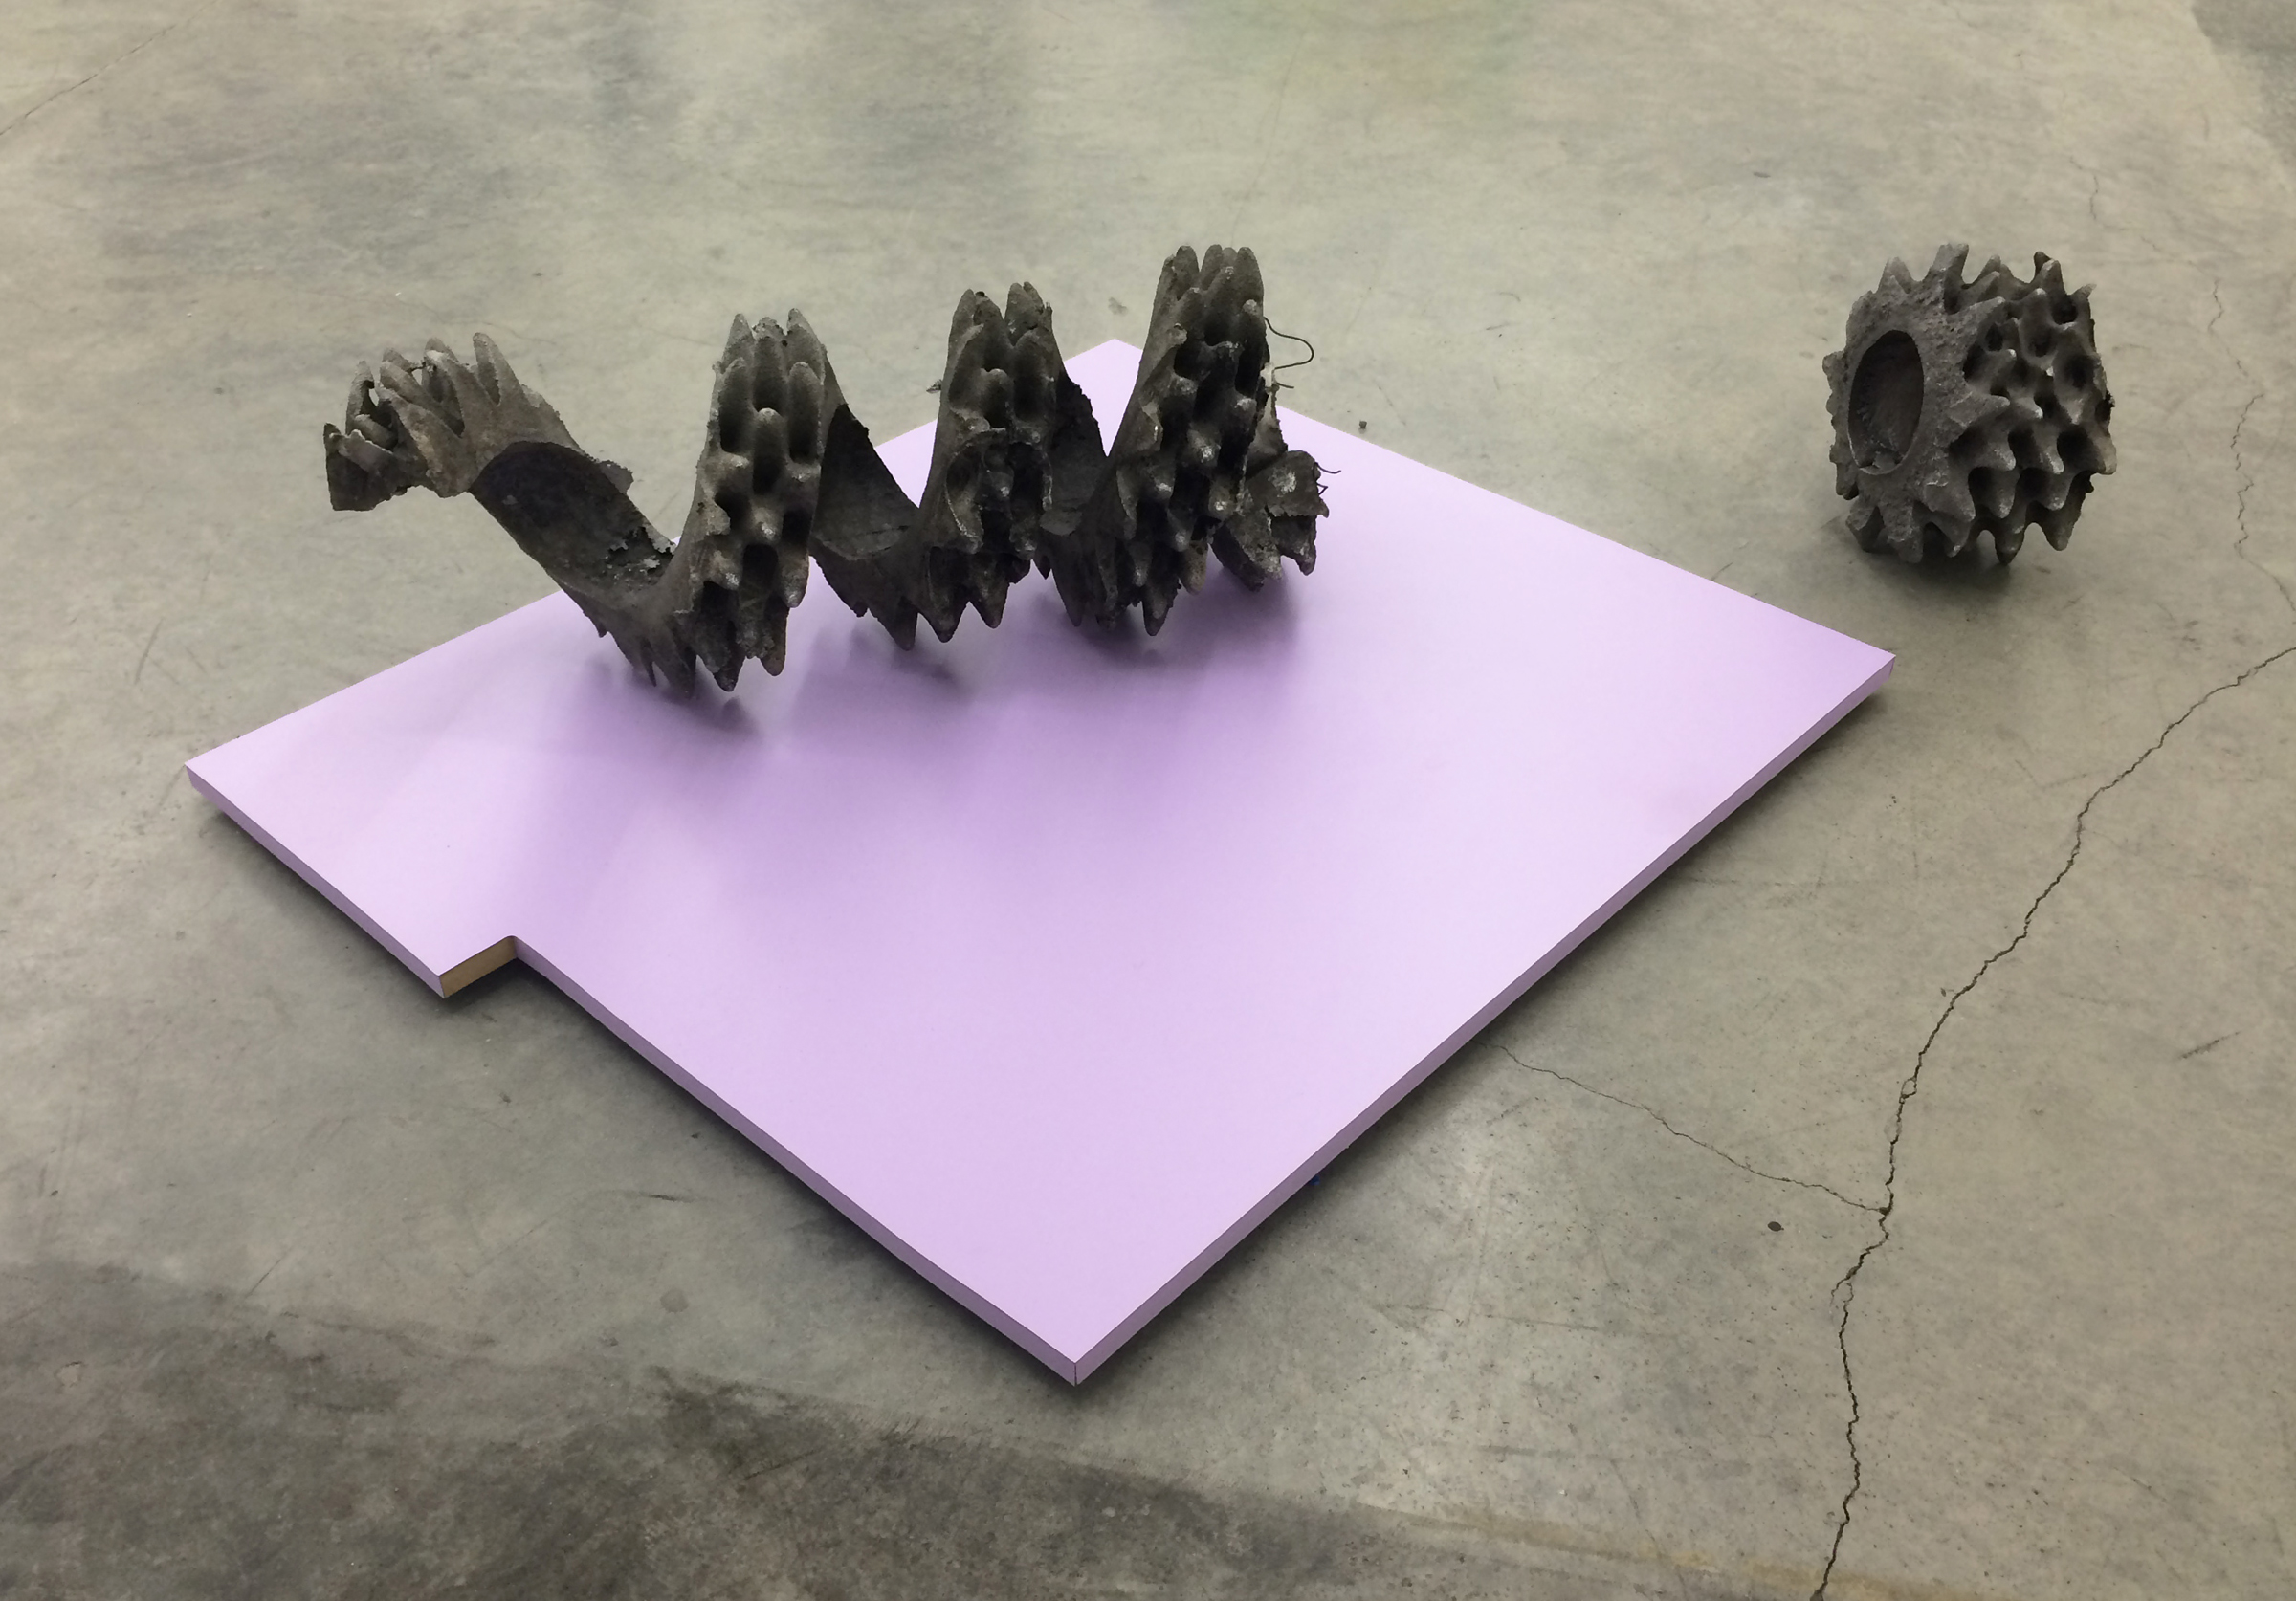   NEVINE MAHMOUD   Ravel (in two parts) with Color Plane Lilac , 2015, cast aluminum, MDF, laminate, 37" x 31" x 12" and 10" x 10" x 6" 